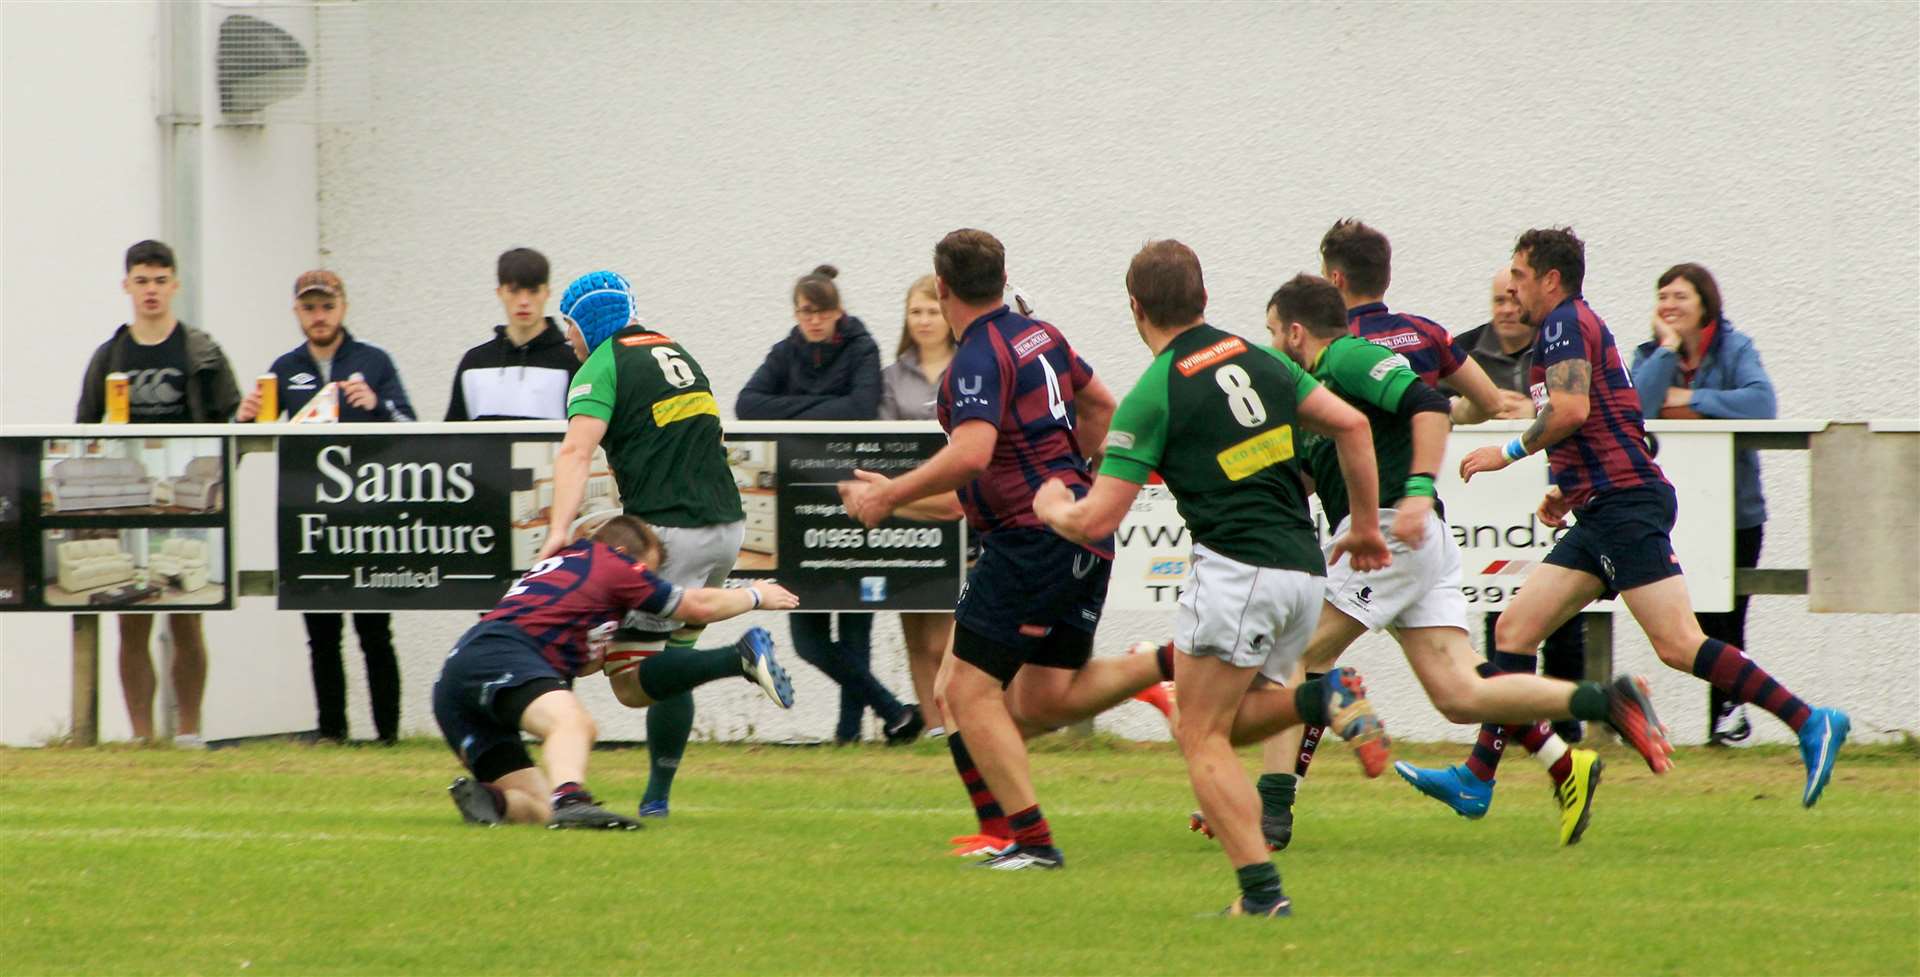 Reece Coghill races through for the bonus-point try in the Greens' 43-3 victory over Hillfoots at Millbank on the opening day of the campaign.